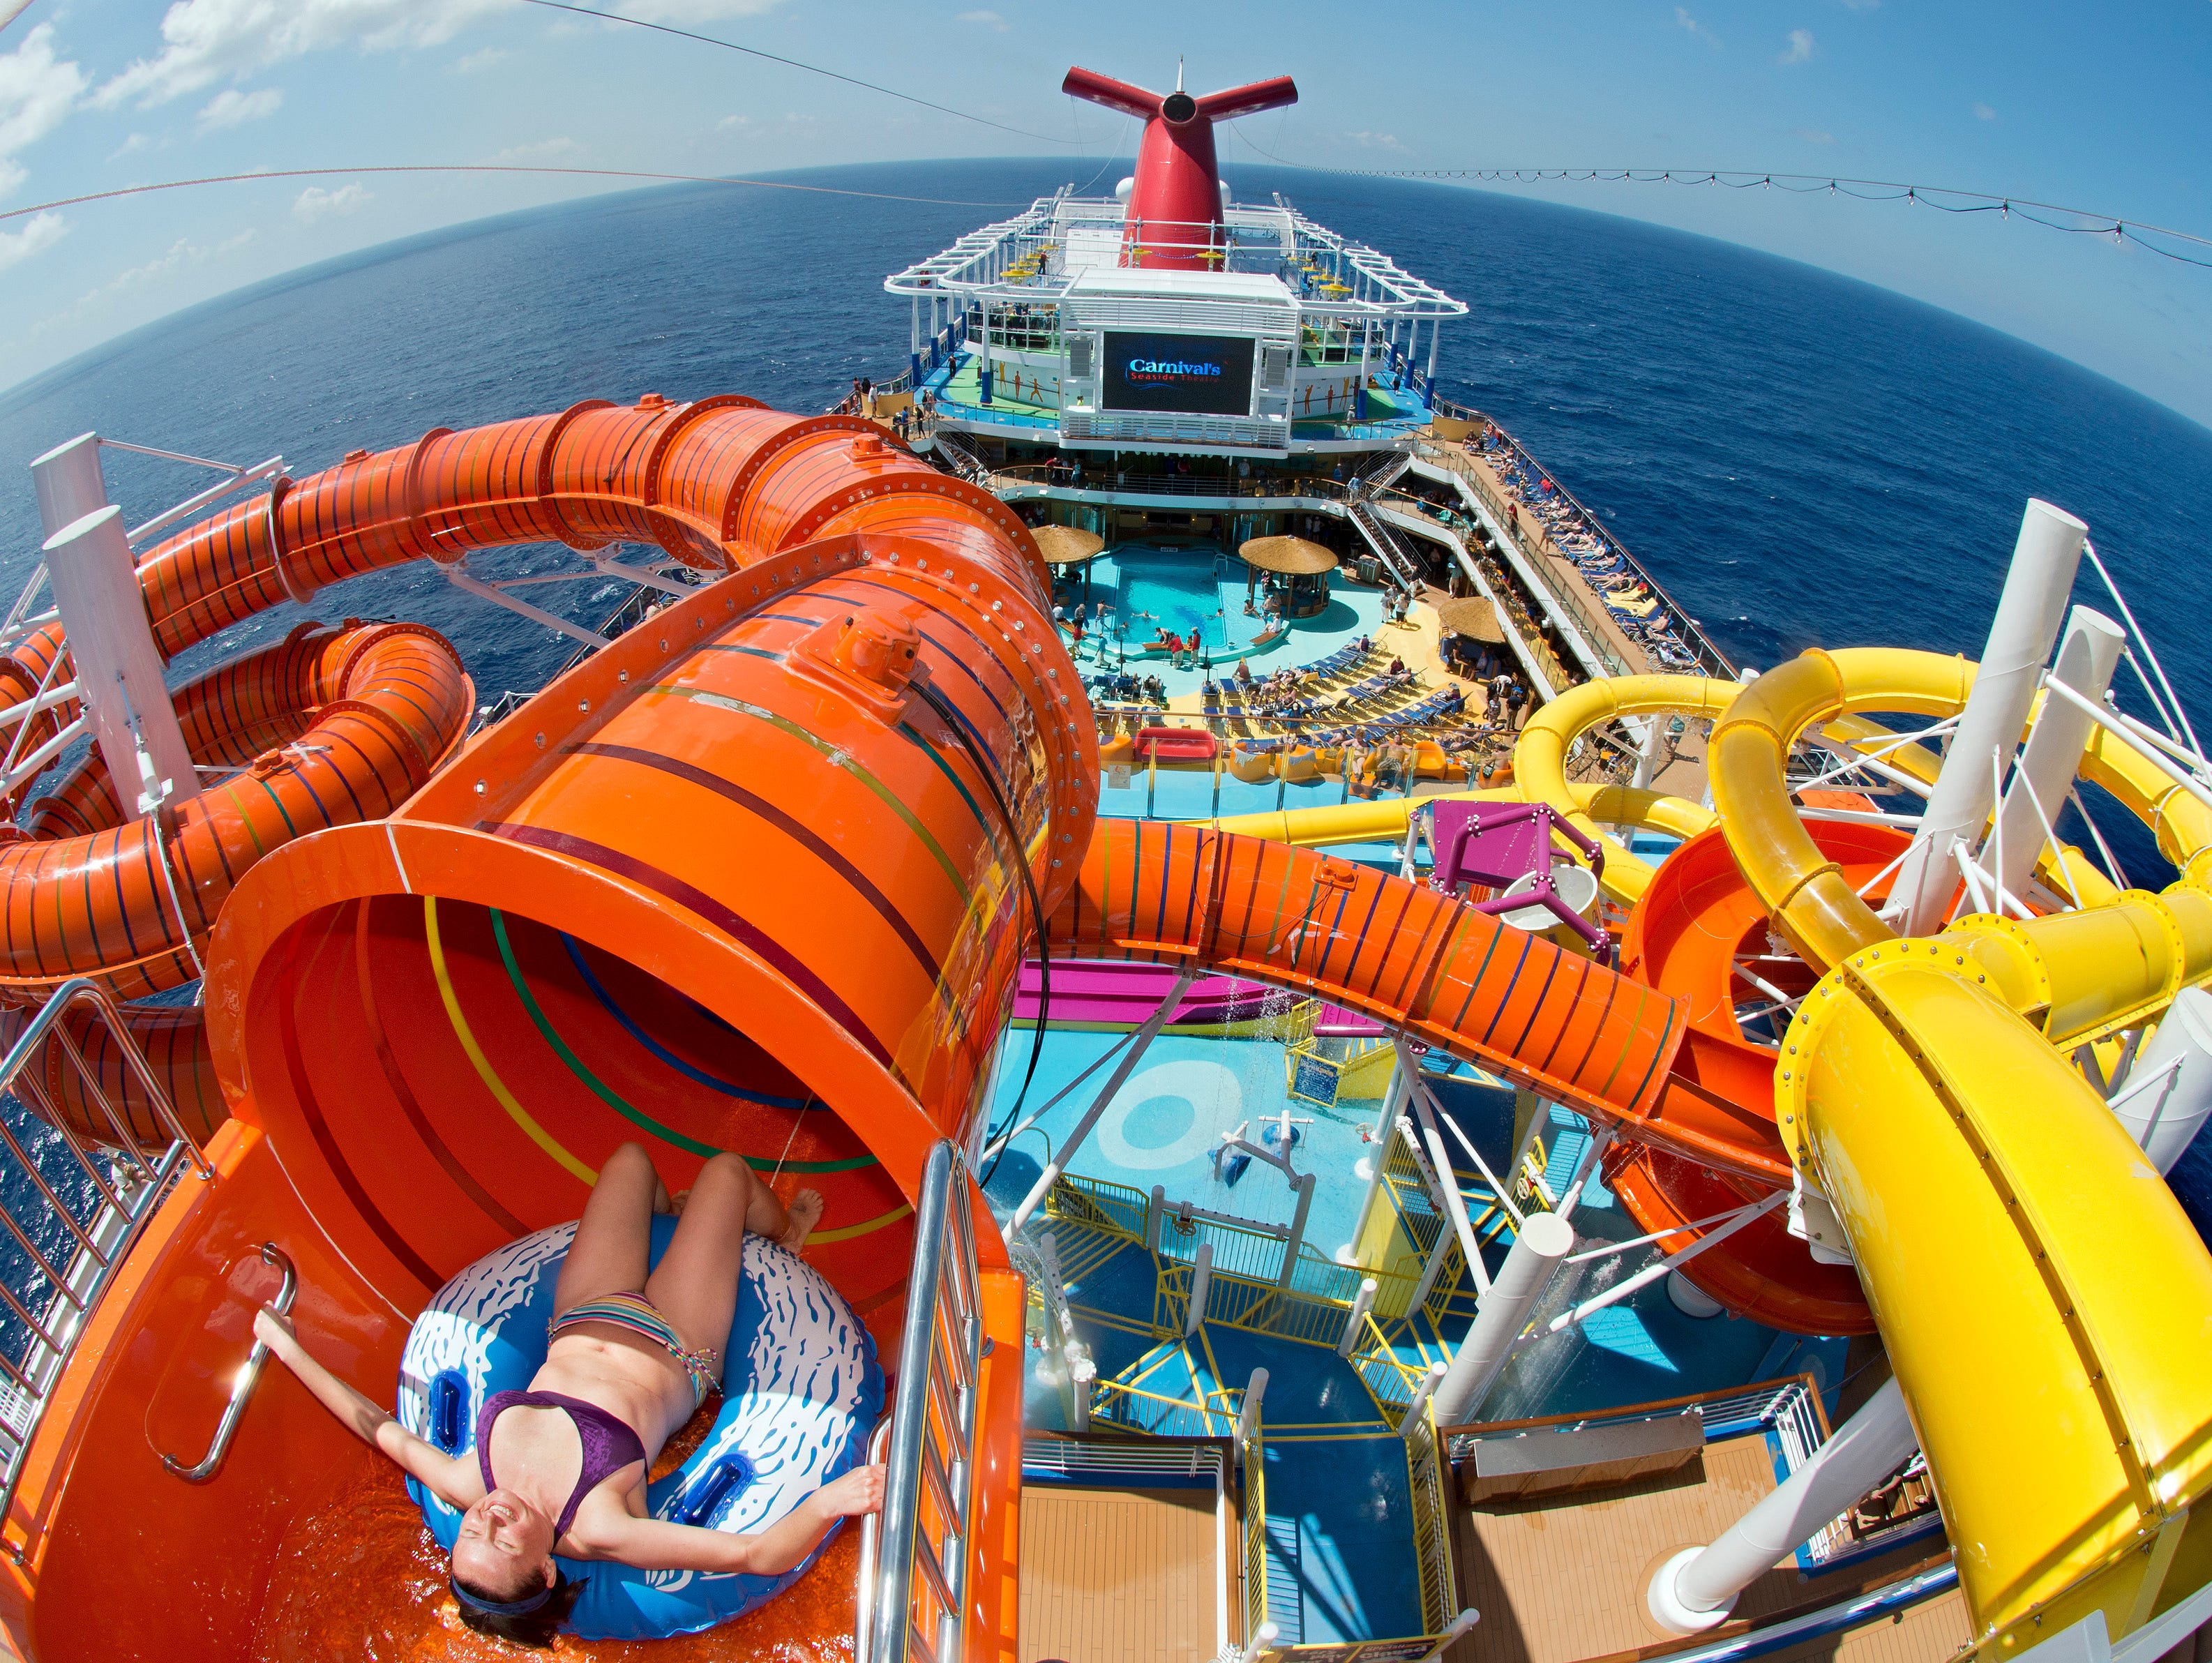 The orange Kaleid-O-Slide is part of the WaterWorks fun zone atop cruise giant Carnival's new Carnival Vista.